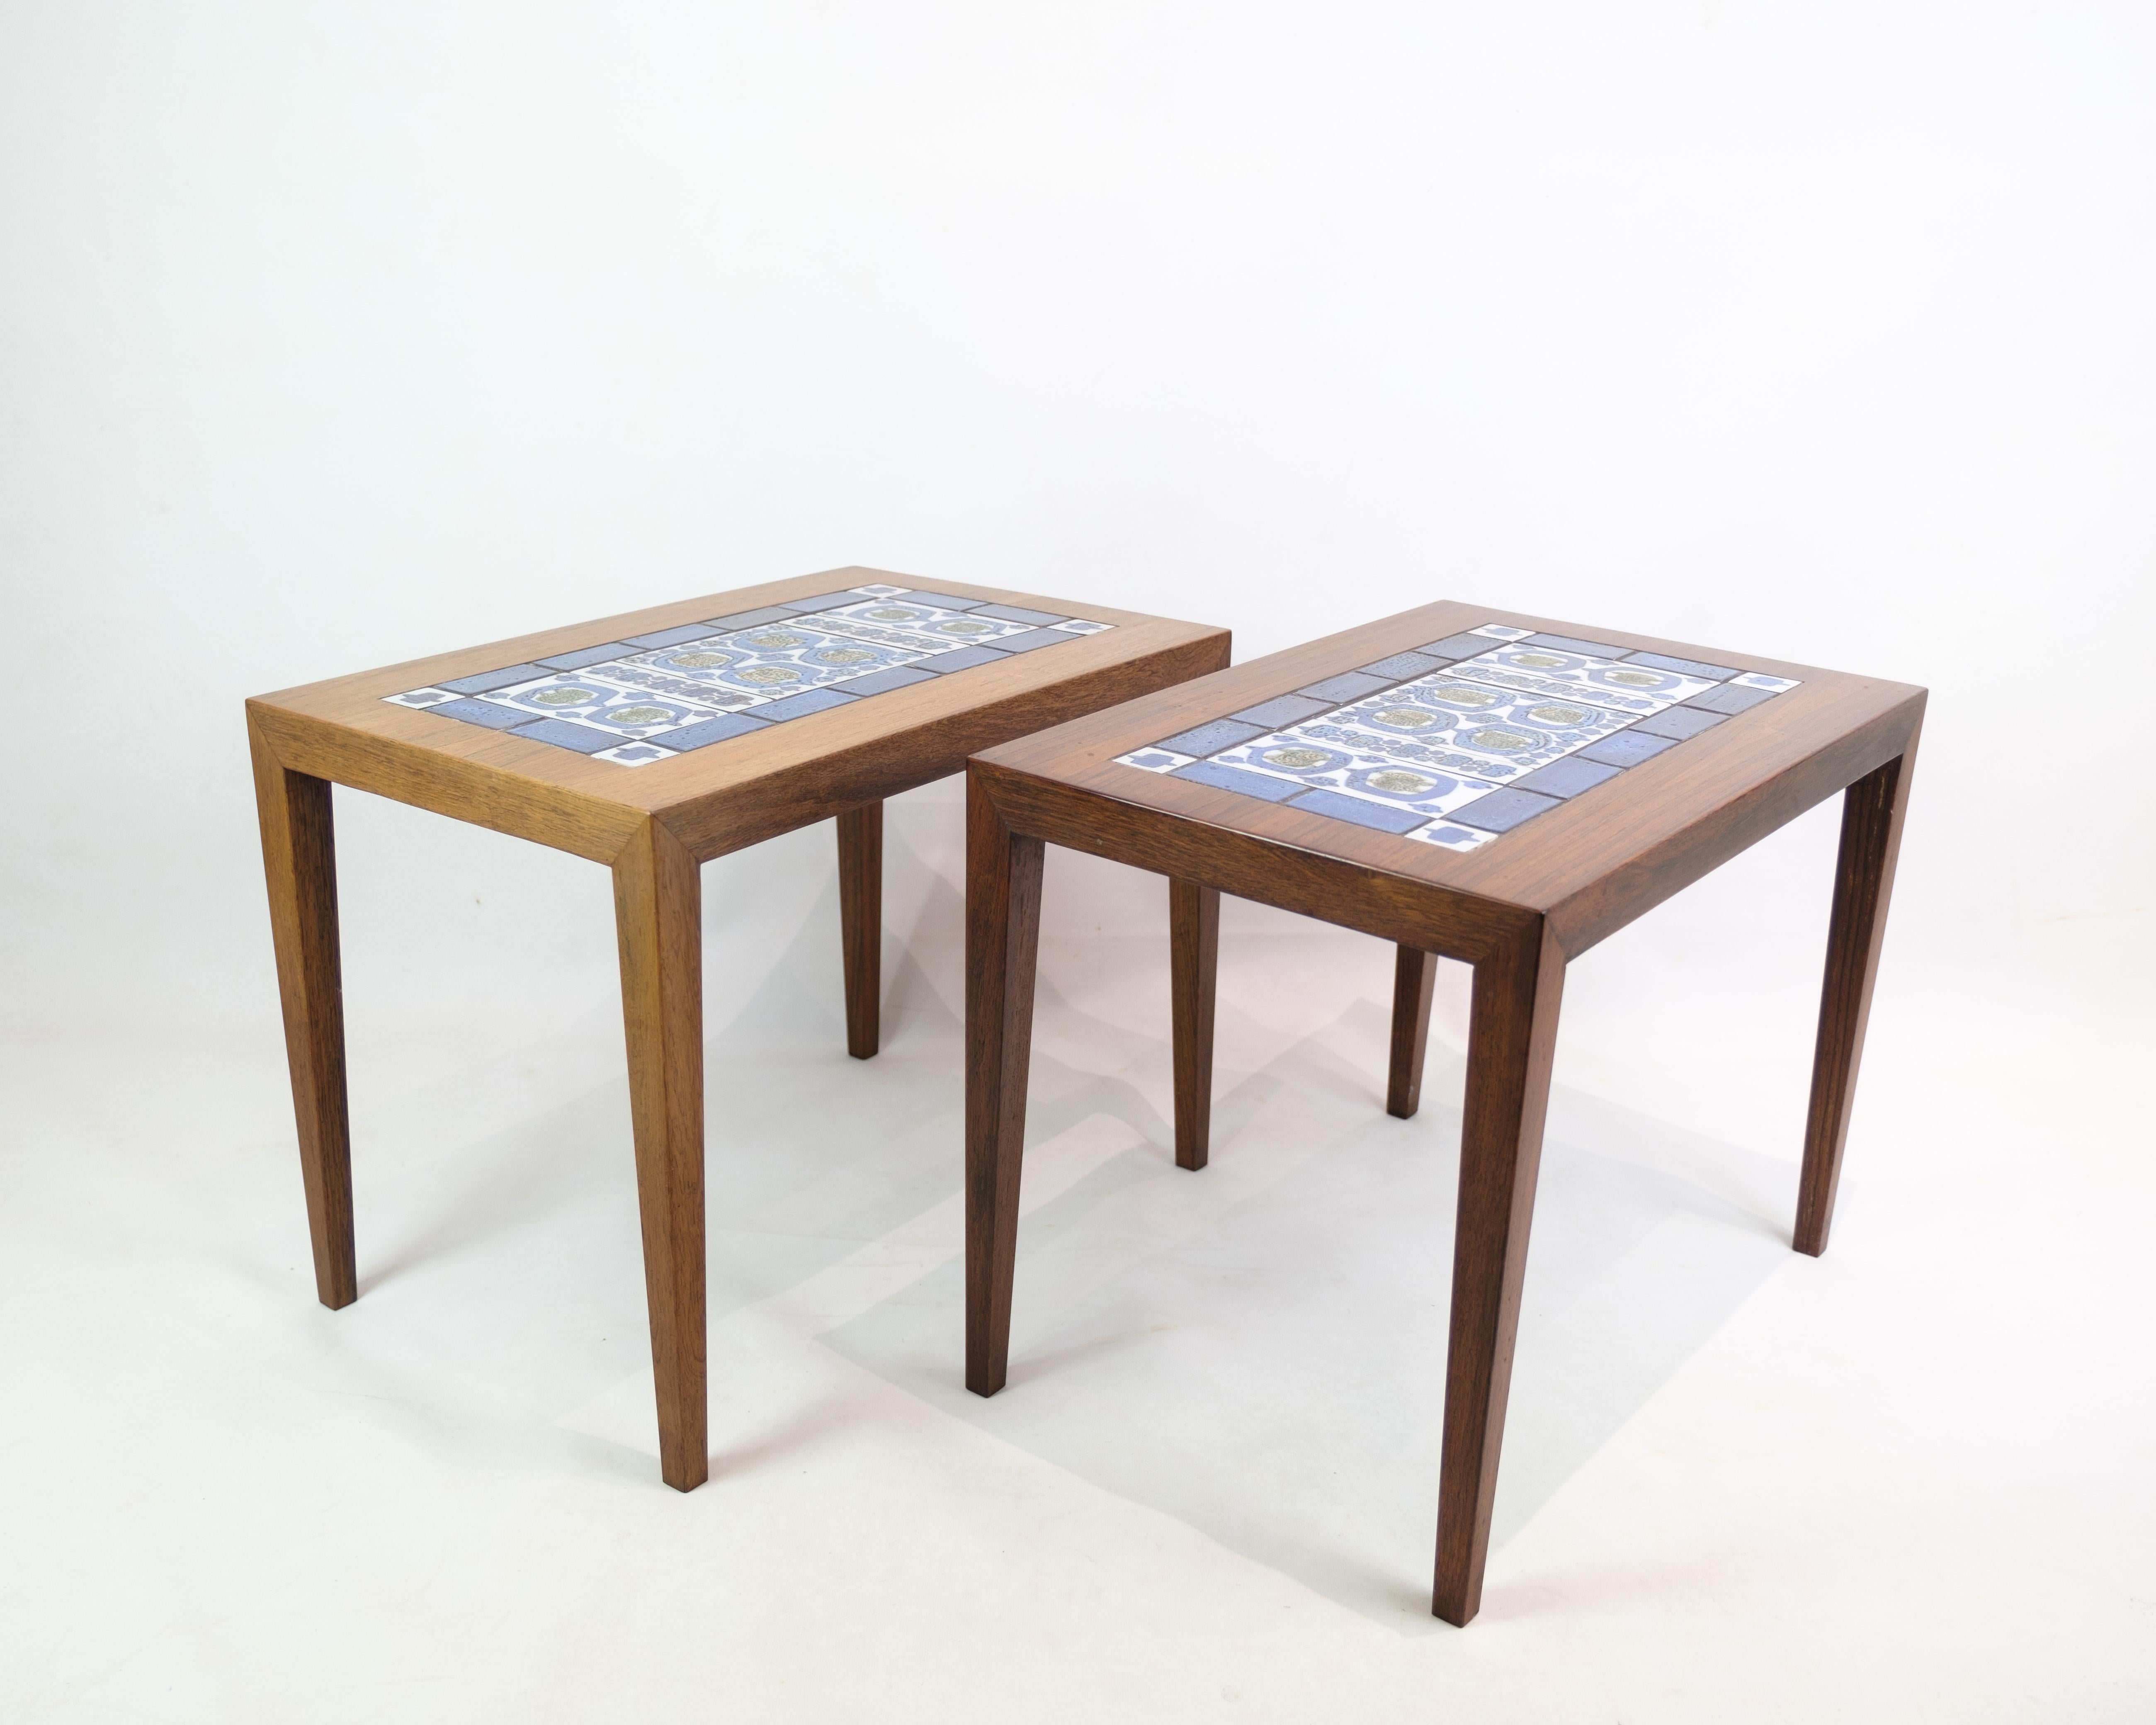 Set of side tables, model 34A, in rosewood designed by Severin Hansen with tiles from the Royal Porcelain Factory, produced around the 1960s. These side tables represent a beautiful combination of quality materials and Danish design heritage. The